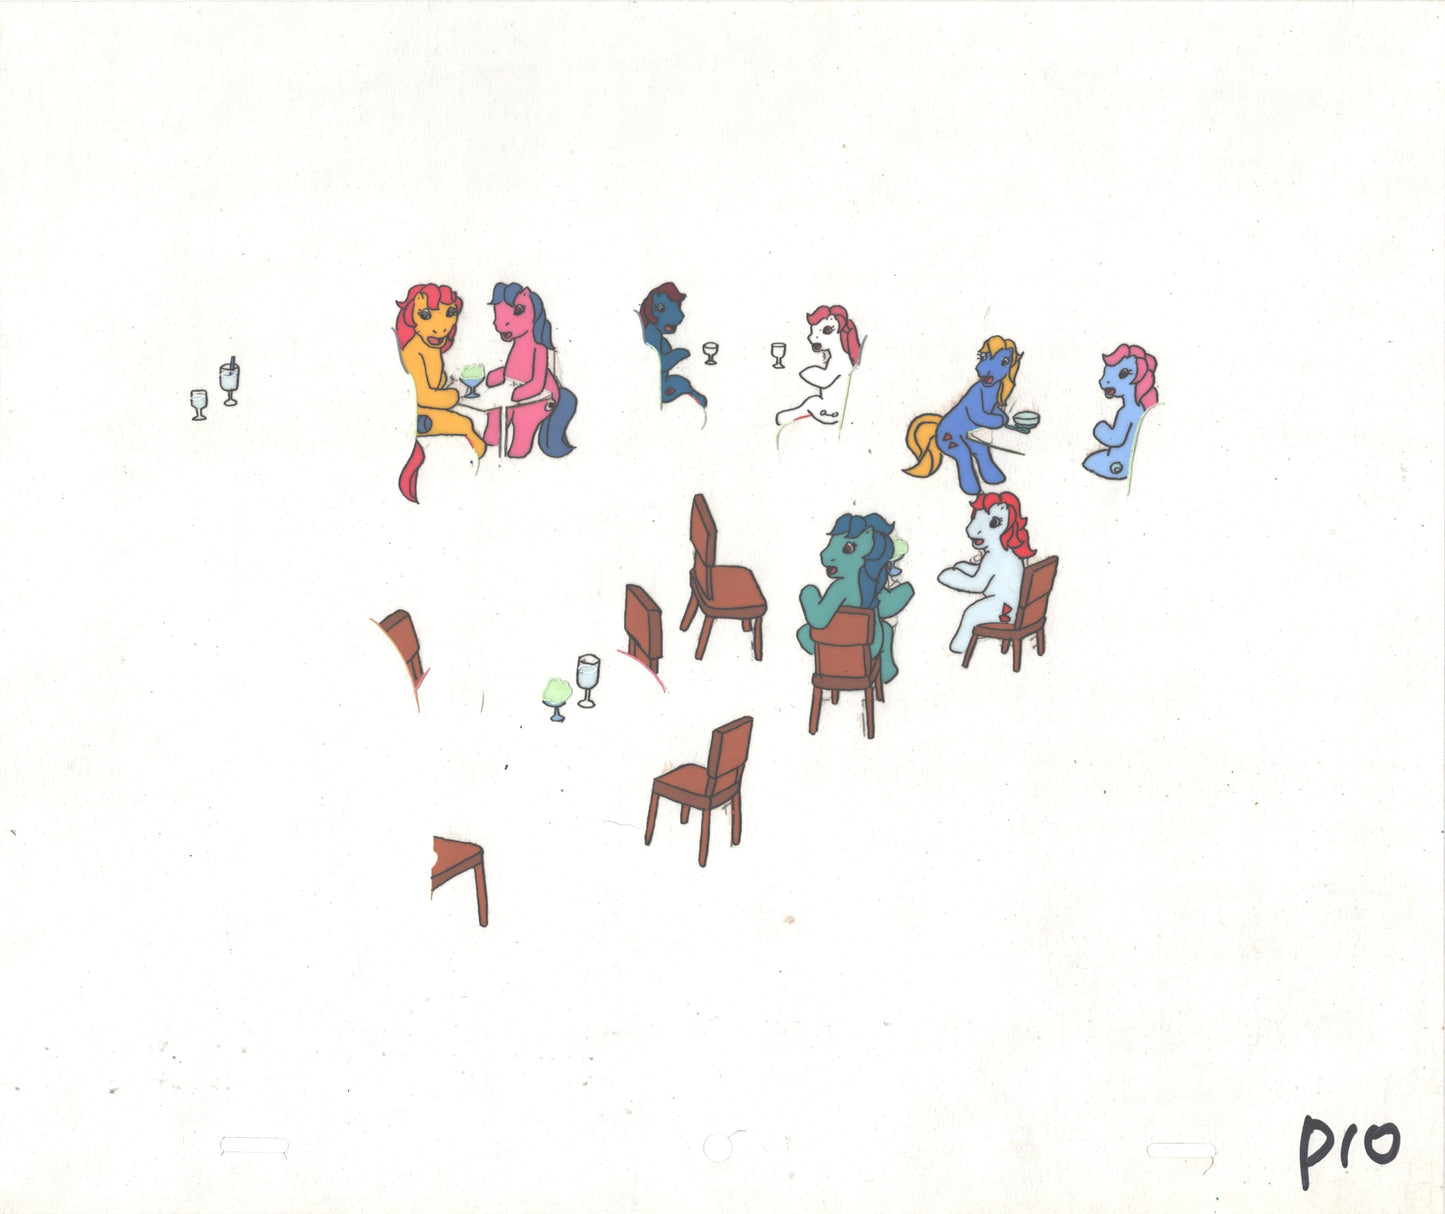 My Little Pony Original Production Animation Cel Hasbro Sunbow 1980s or 90s Used to Make the Cartoon H-P10